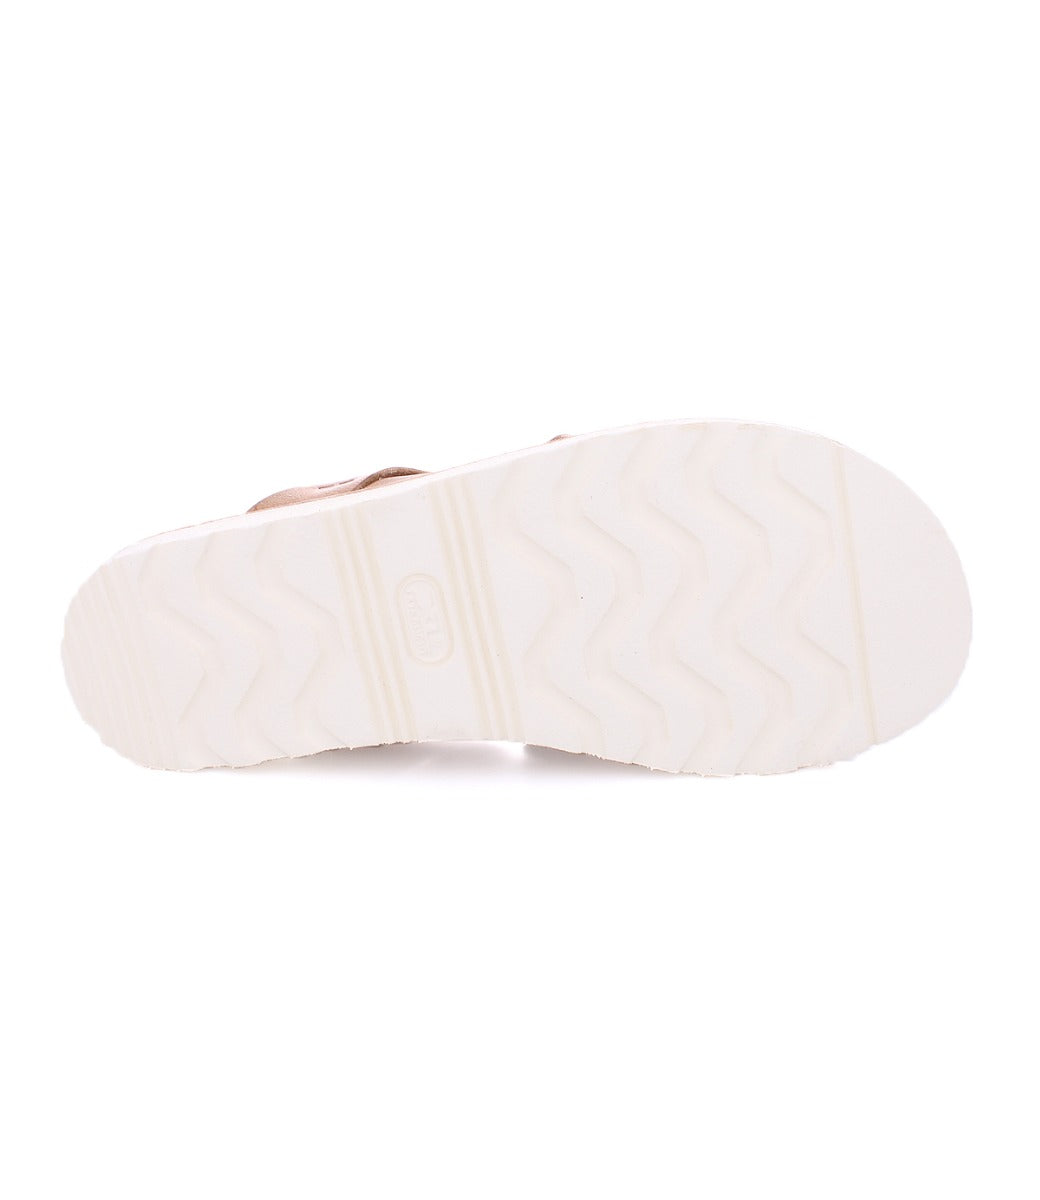 A pair of Bed Stu's Abraham Light women's sandals with white soles on a white background.